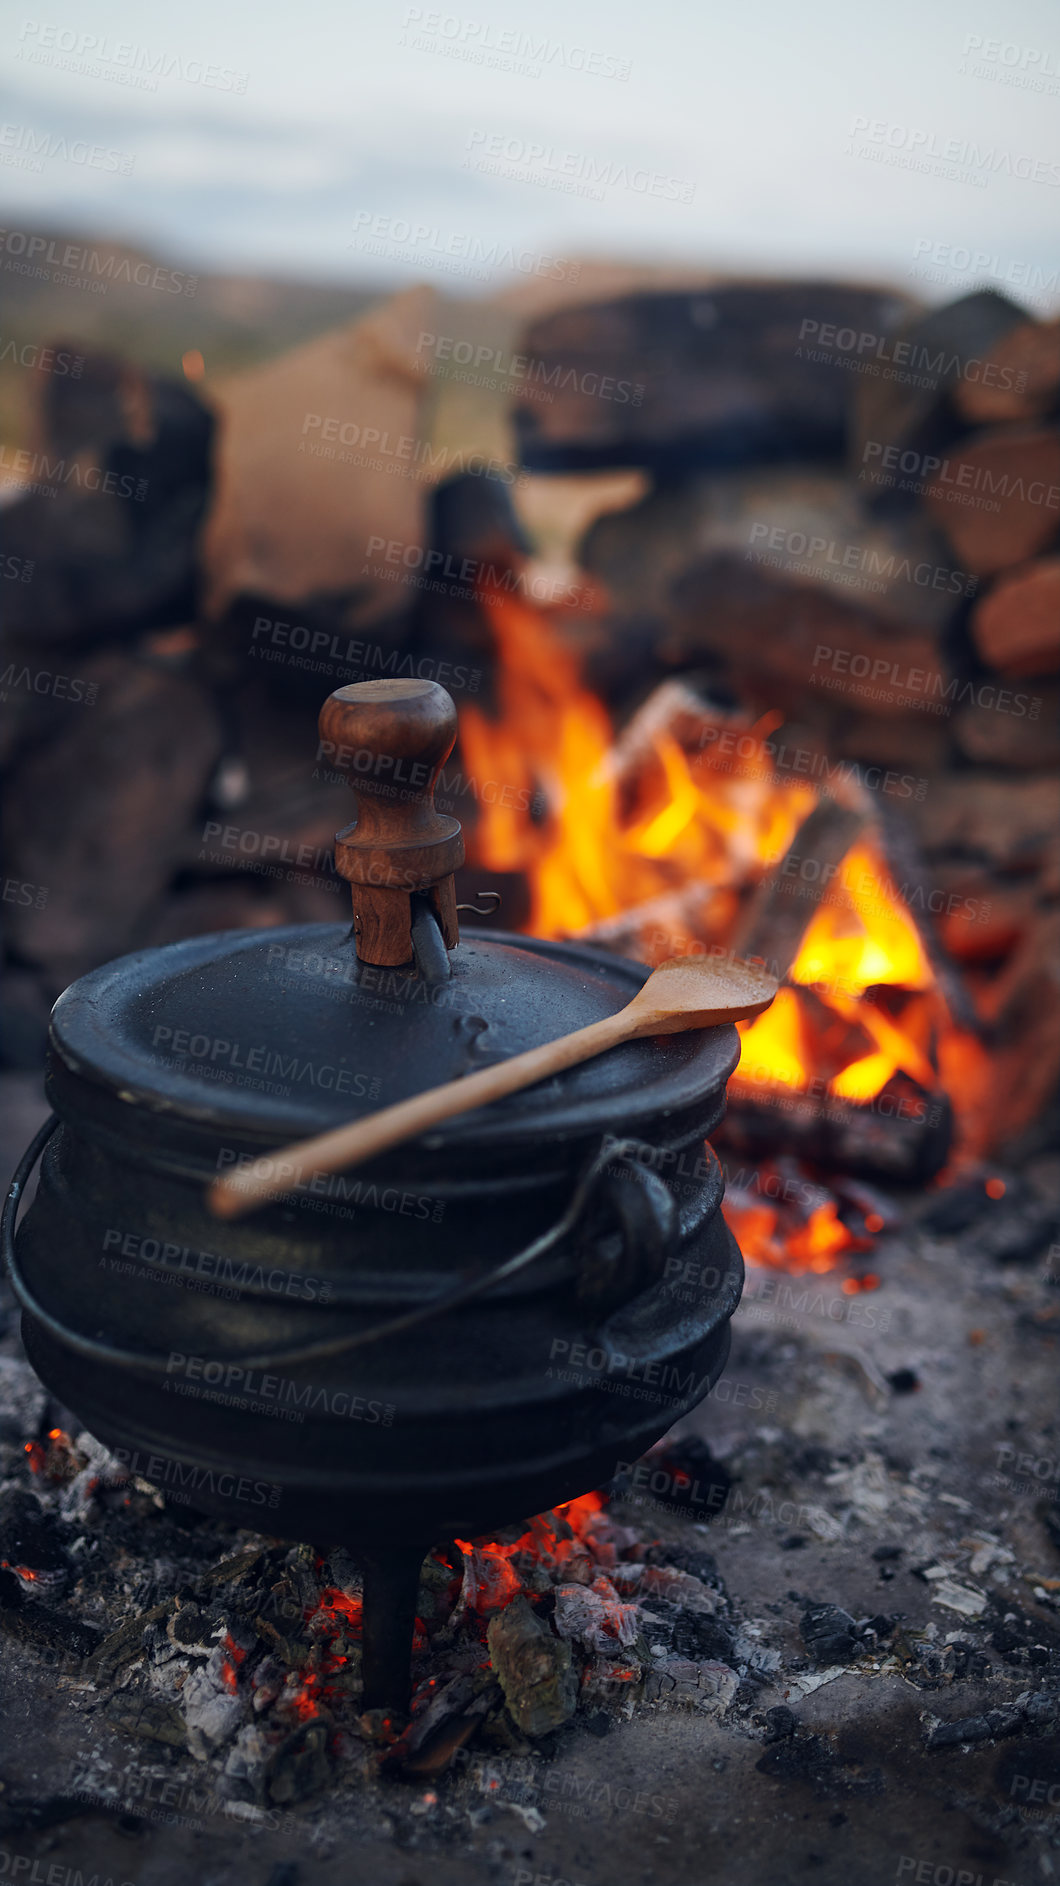 Buy stock photo Shot of a traditional South African food being cooked by campfire outdoors